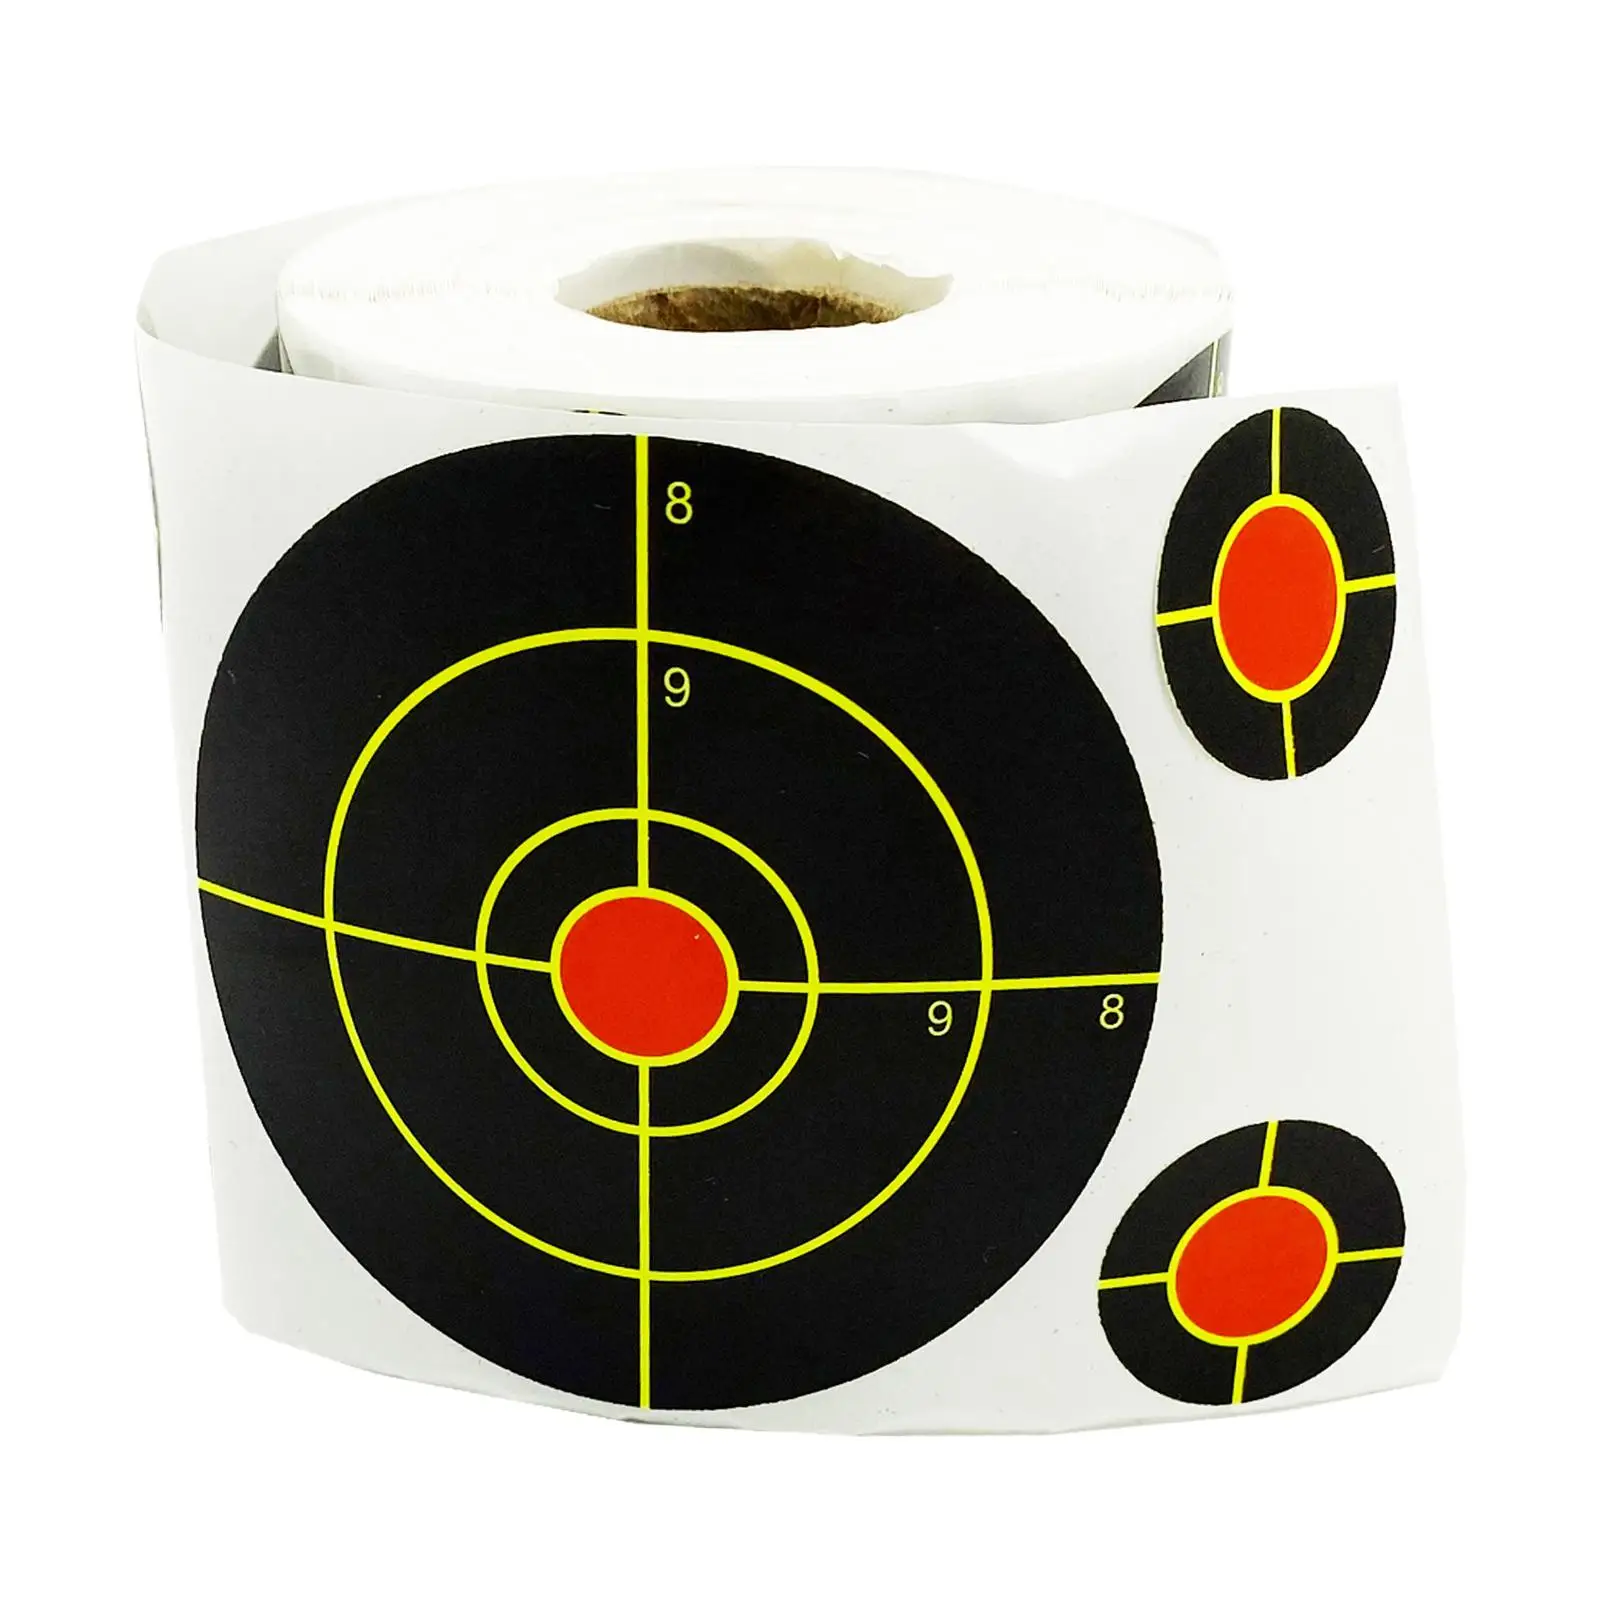 Round Shooting Targets Paper Sticker Splatter Reactive Adhesive Paste High Visibility Paper Target for Archery Garden Bow Arrow